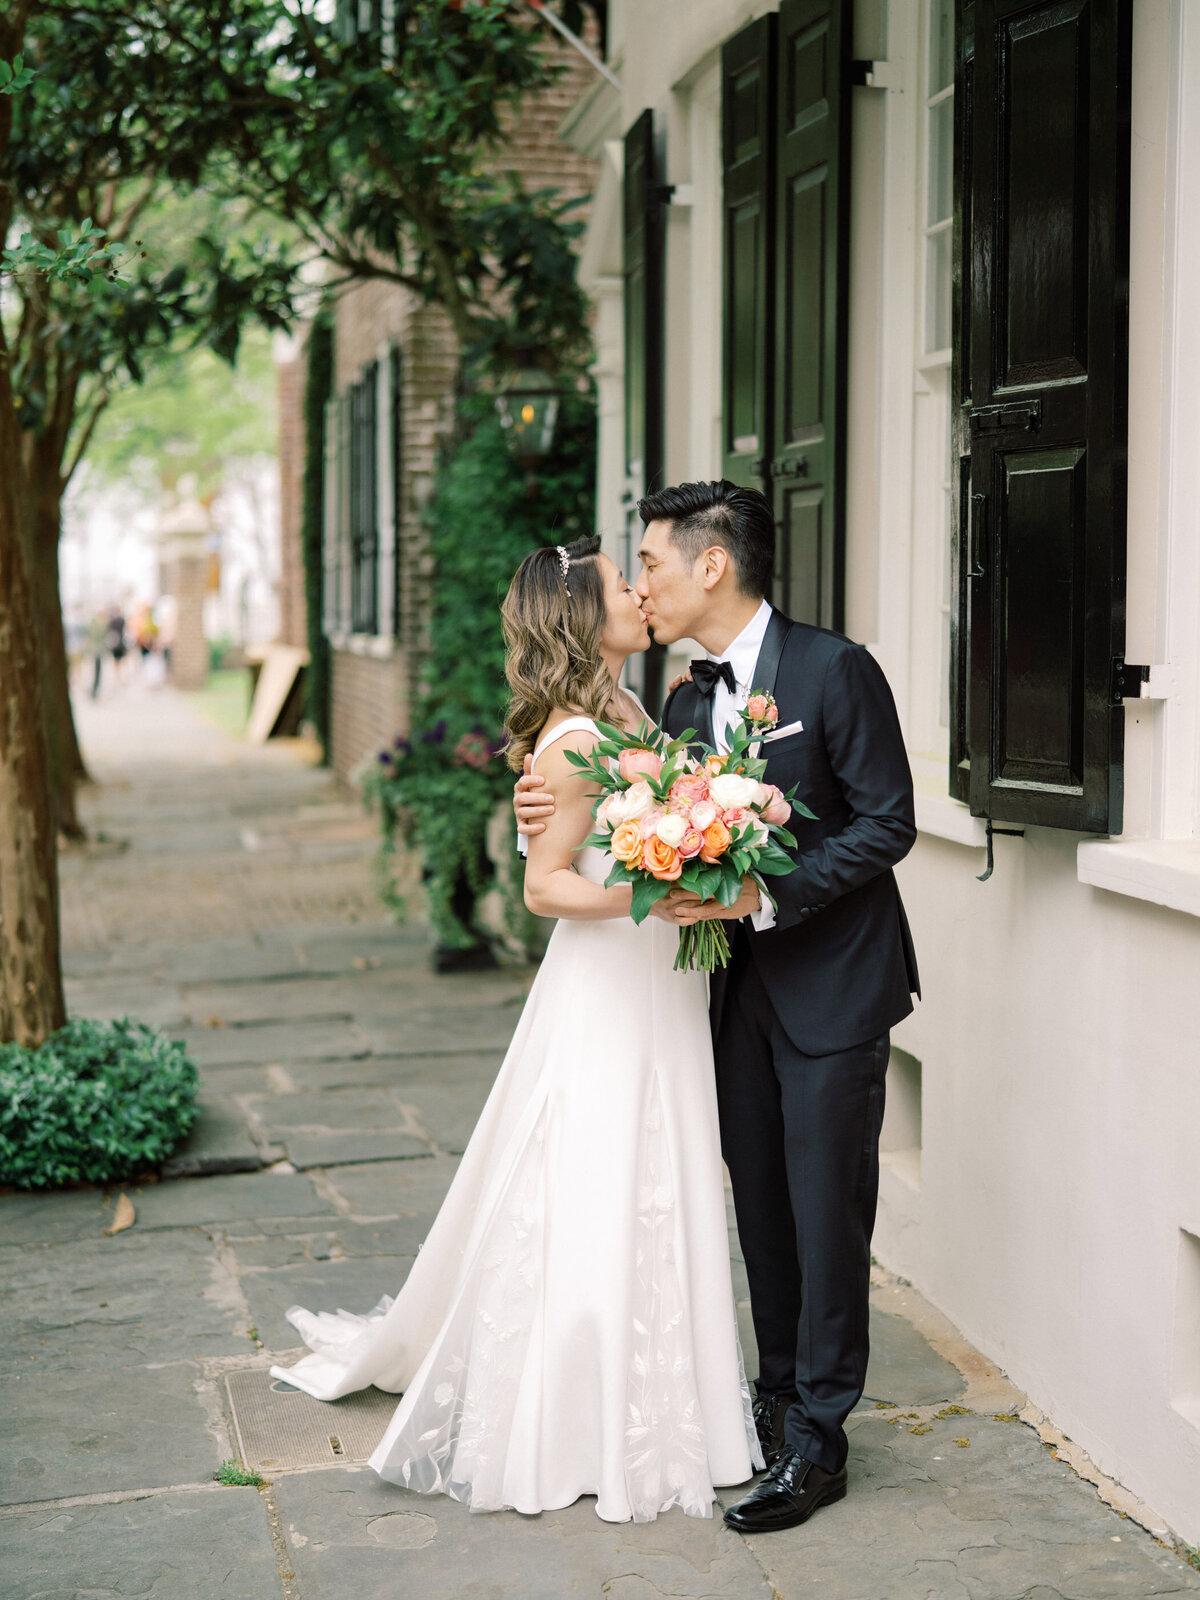 Cannon-Green-Wedding-in-charleston-photo-by-philip-casey-photography-046